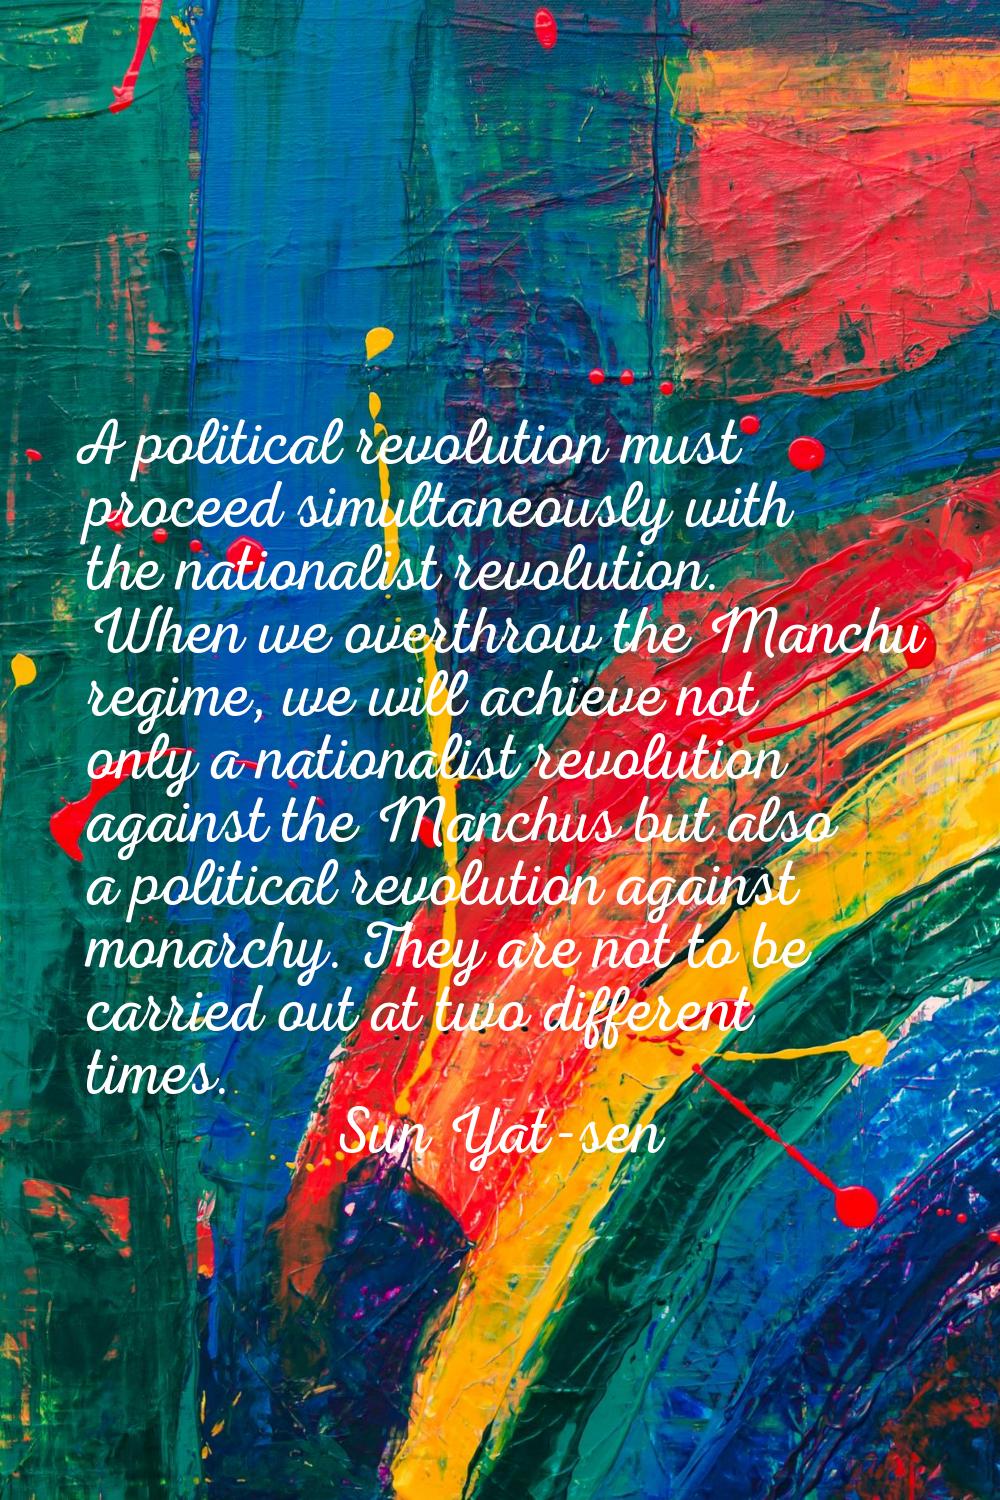 A political revolution must proceed simultaneously with the nationalist revolution. When we overthr